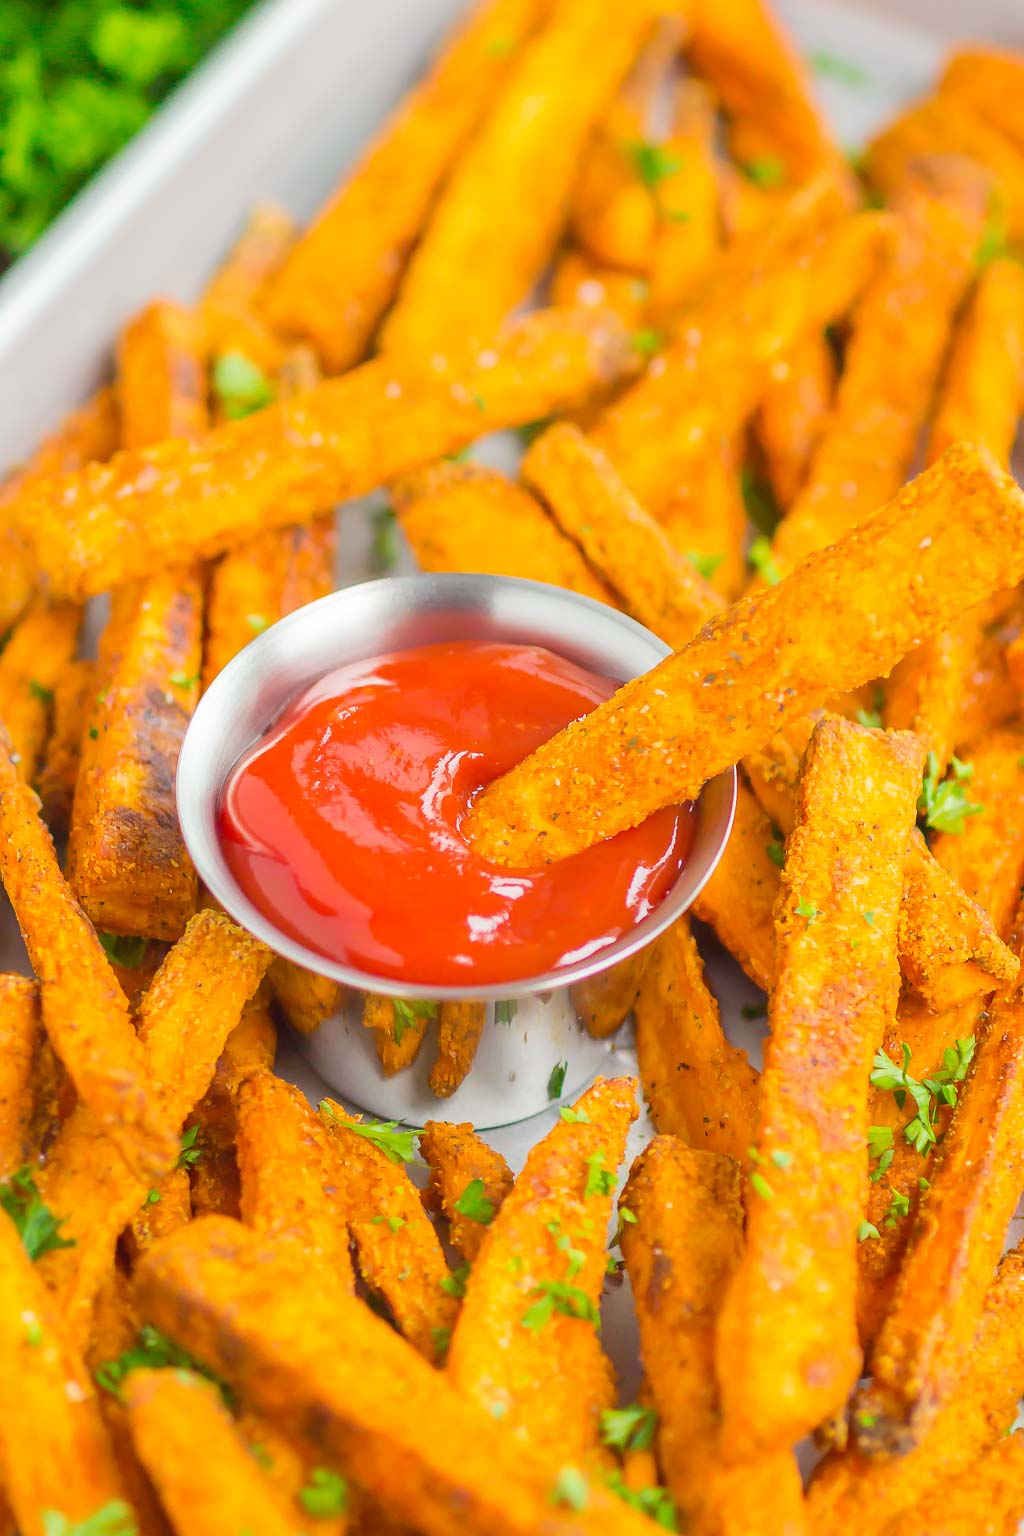 Crispy Baked Sweet Potato Fries are easy to make and seasoned to perfection. Healthier than the fried version and so delicious, theseÂ crunchy fries are perfect for a simple snack or side dish!